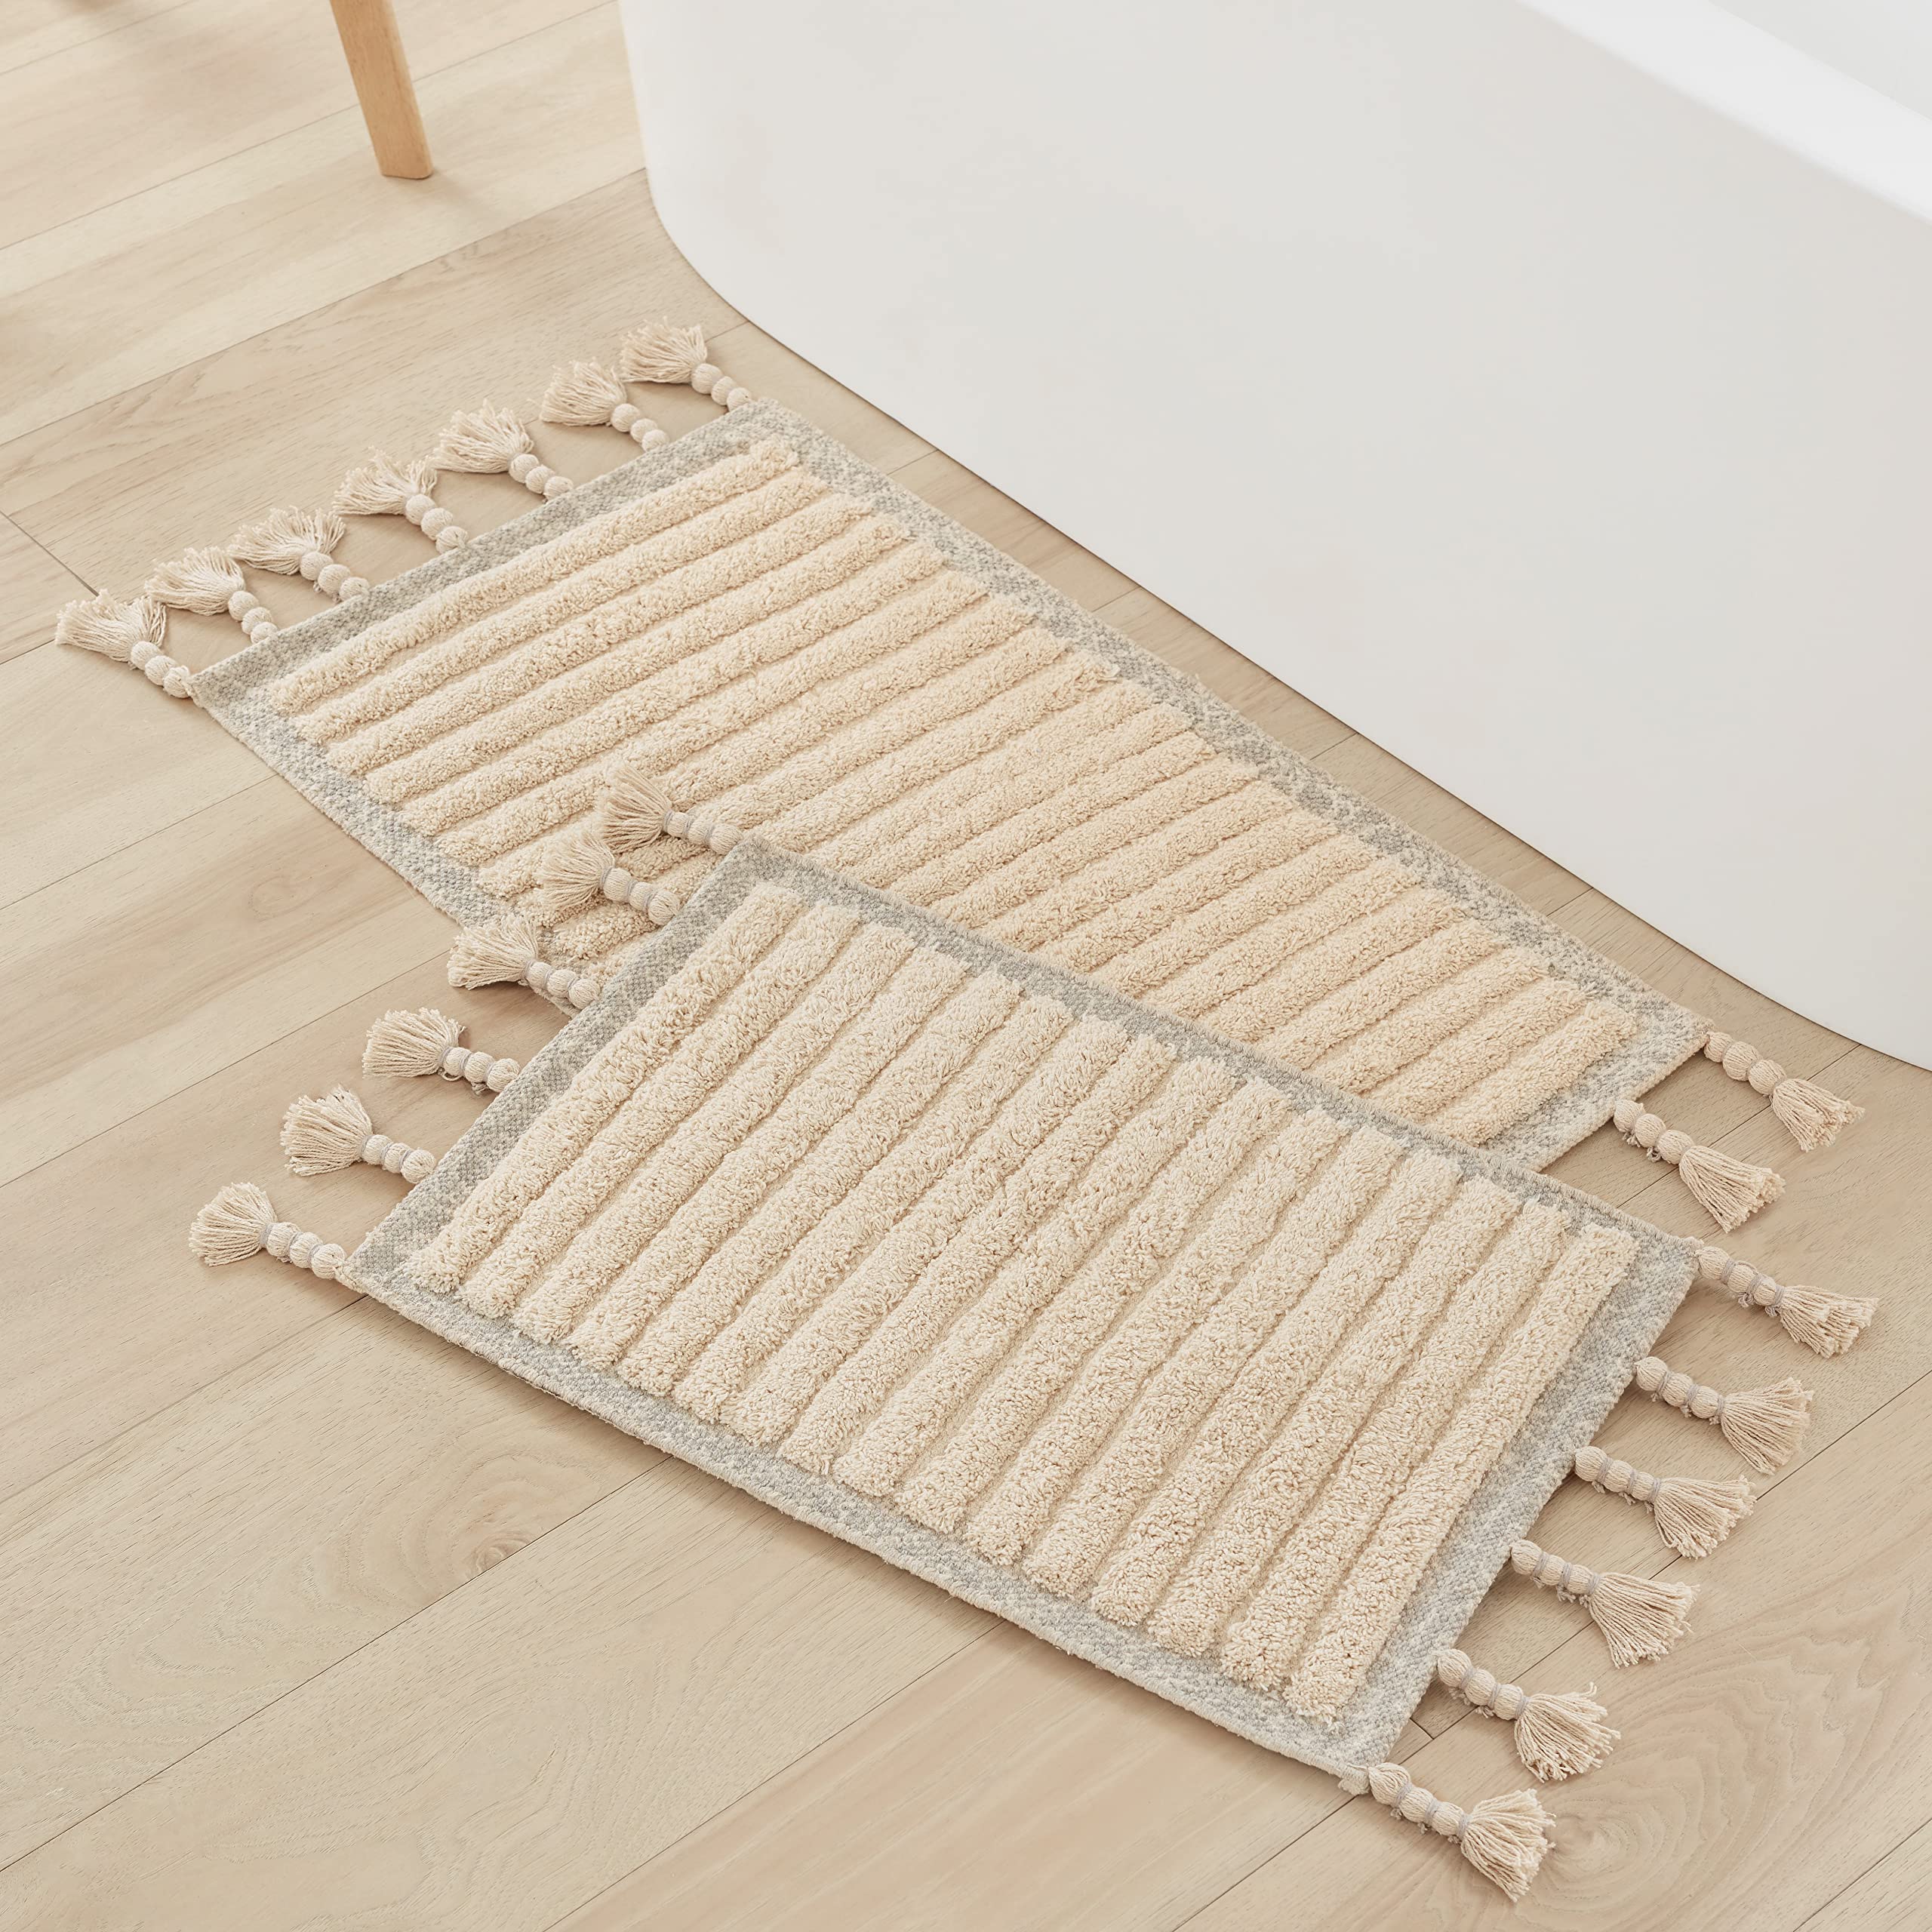 2-Piece Lucky Brand Overtufted Cotton Fringe Bath Rugs w/ Tassels Set (Light Grey) $16 + Free Shipping w/ Prime or on $35+